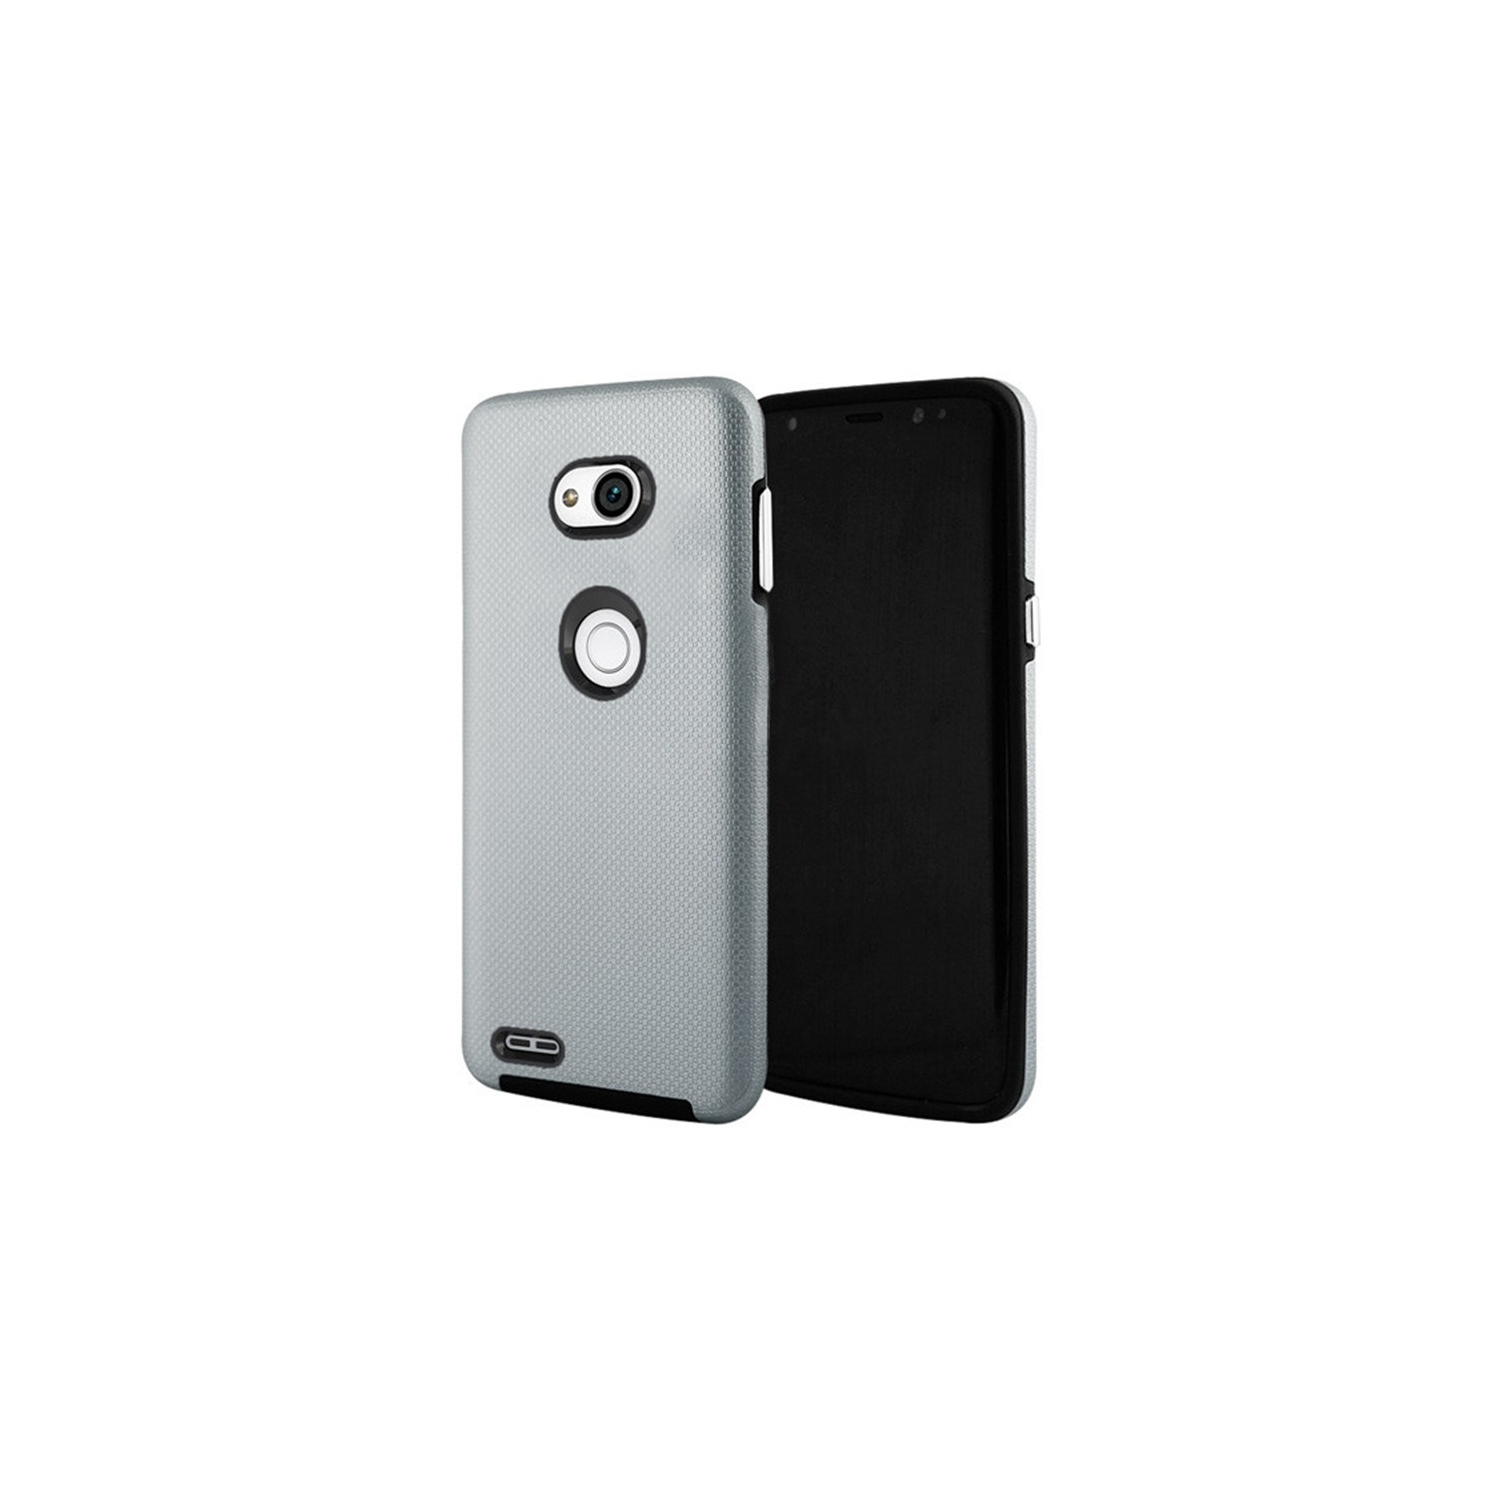 【CSmart】 Slim Fitted Hybrid Hard PC Shell Shockproof Scratch Resistant Case Cover for LG X Power 3, Silver